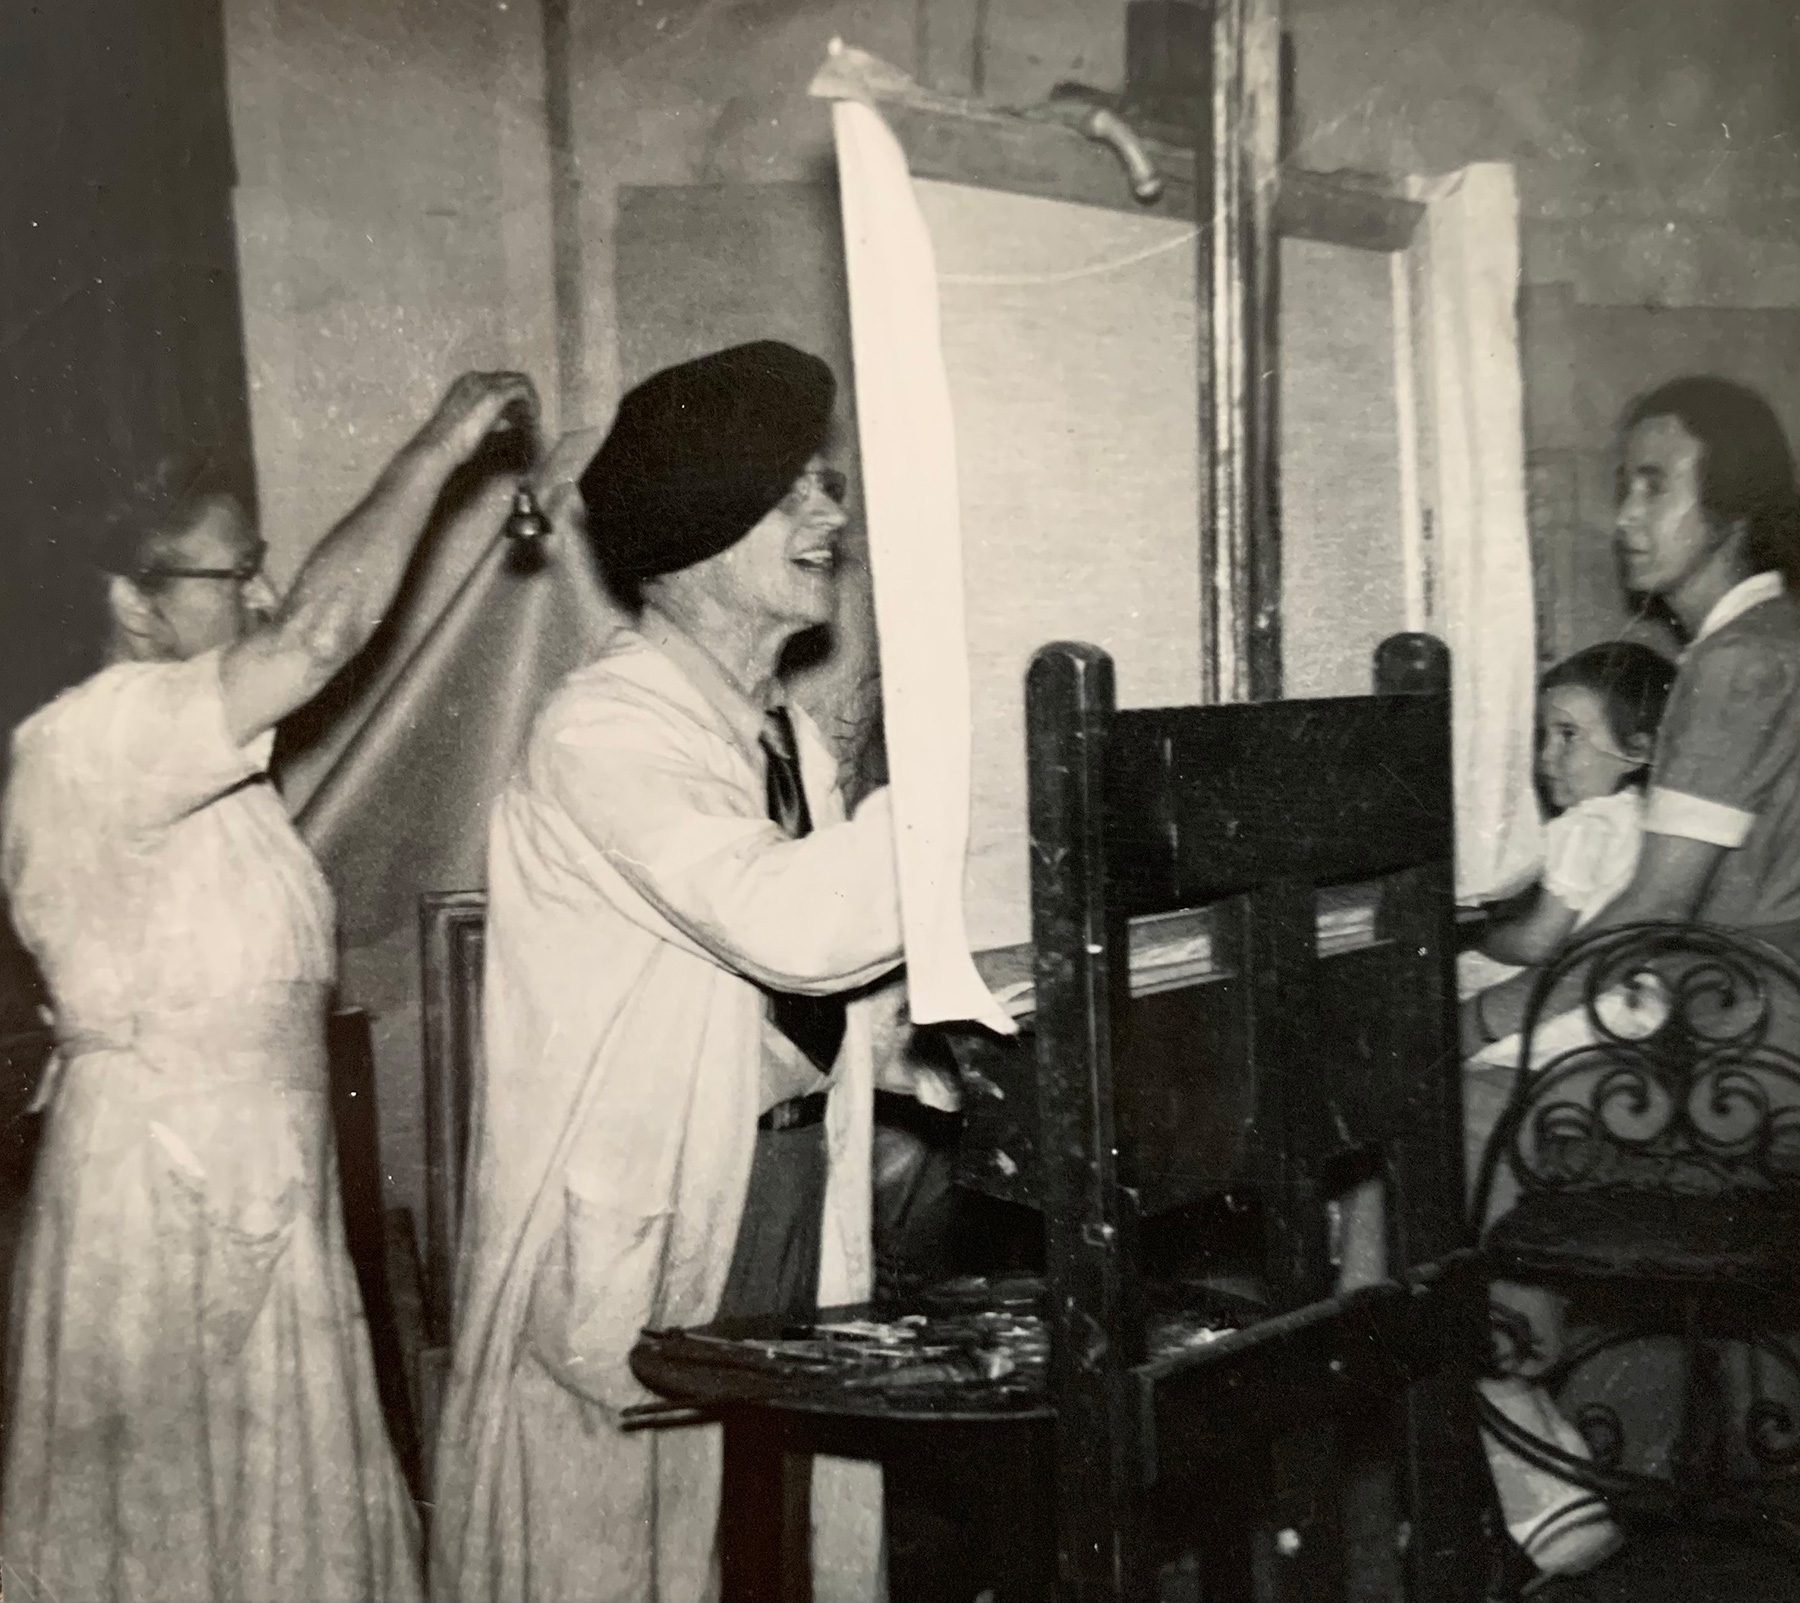 Historic photo of Ortlip family member painting at easel.